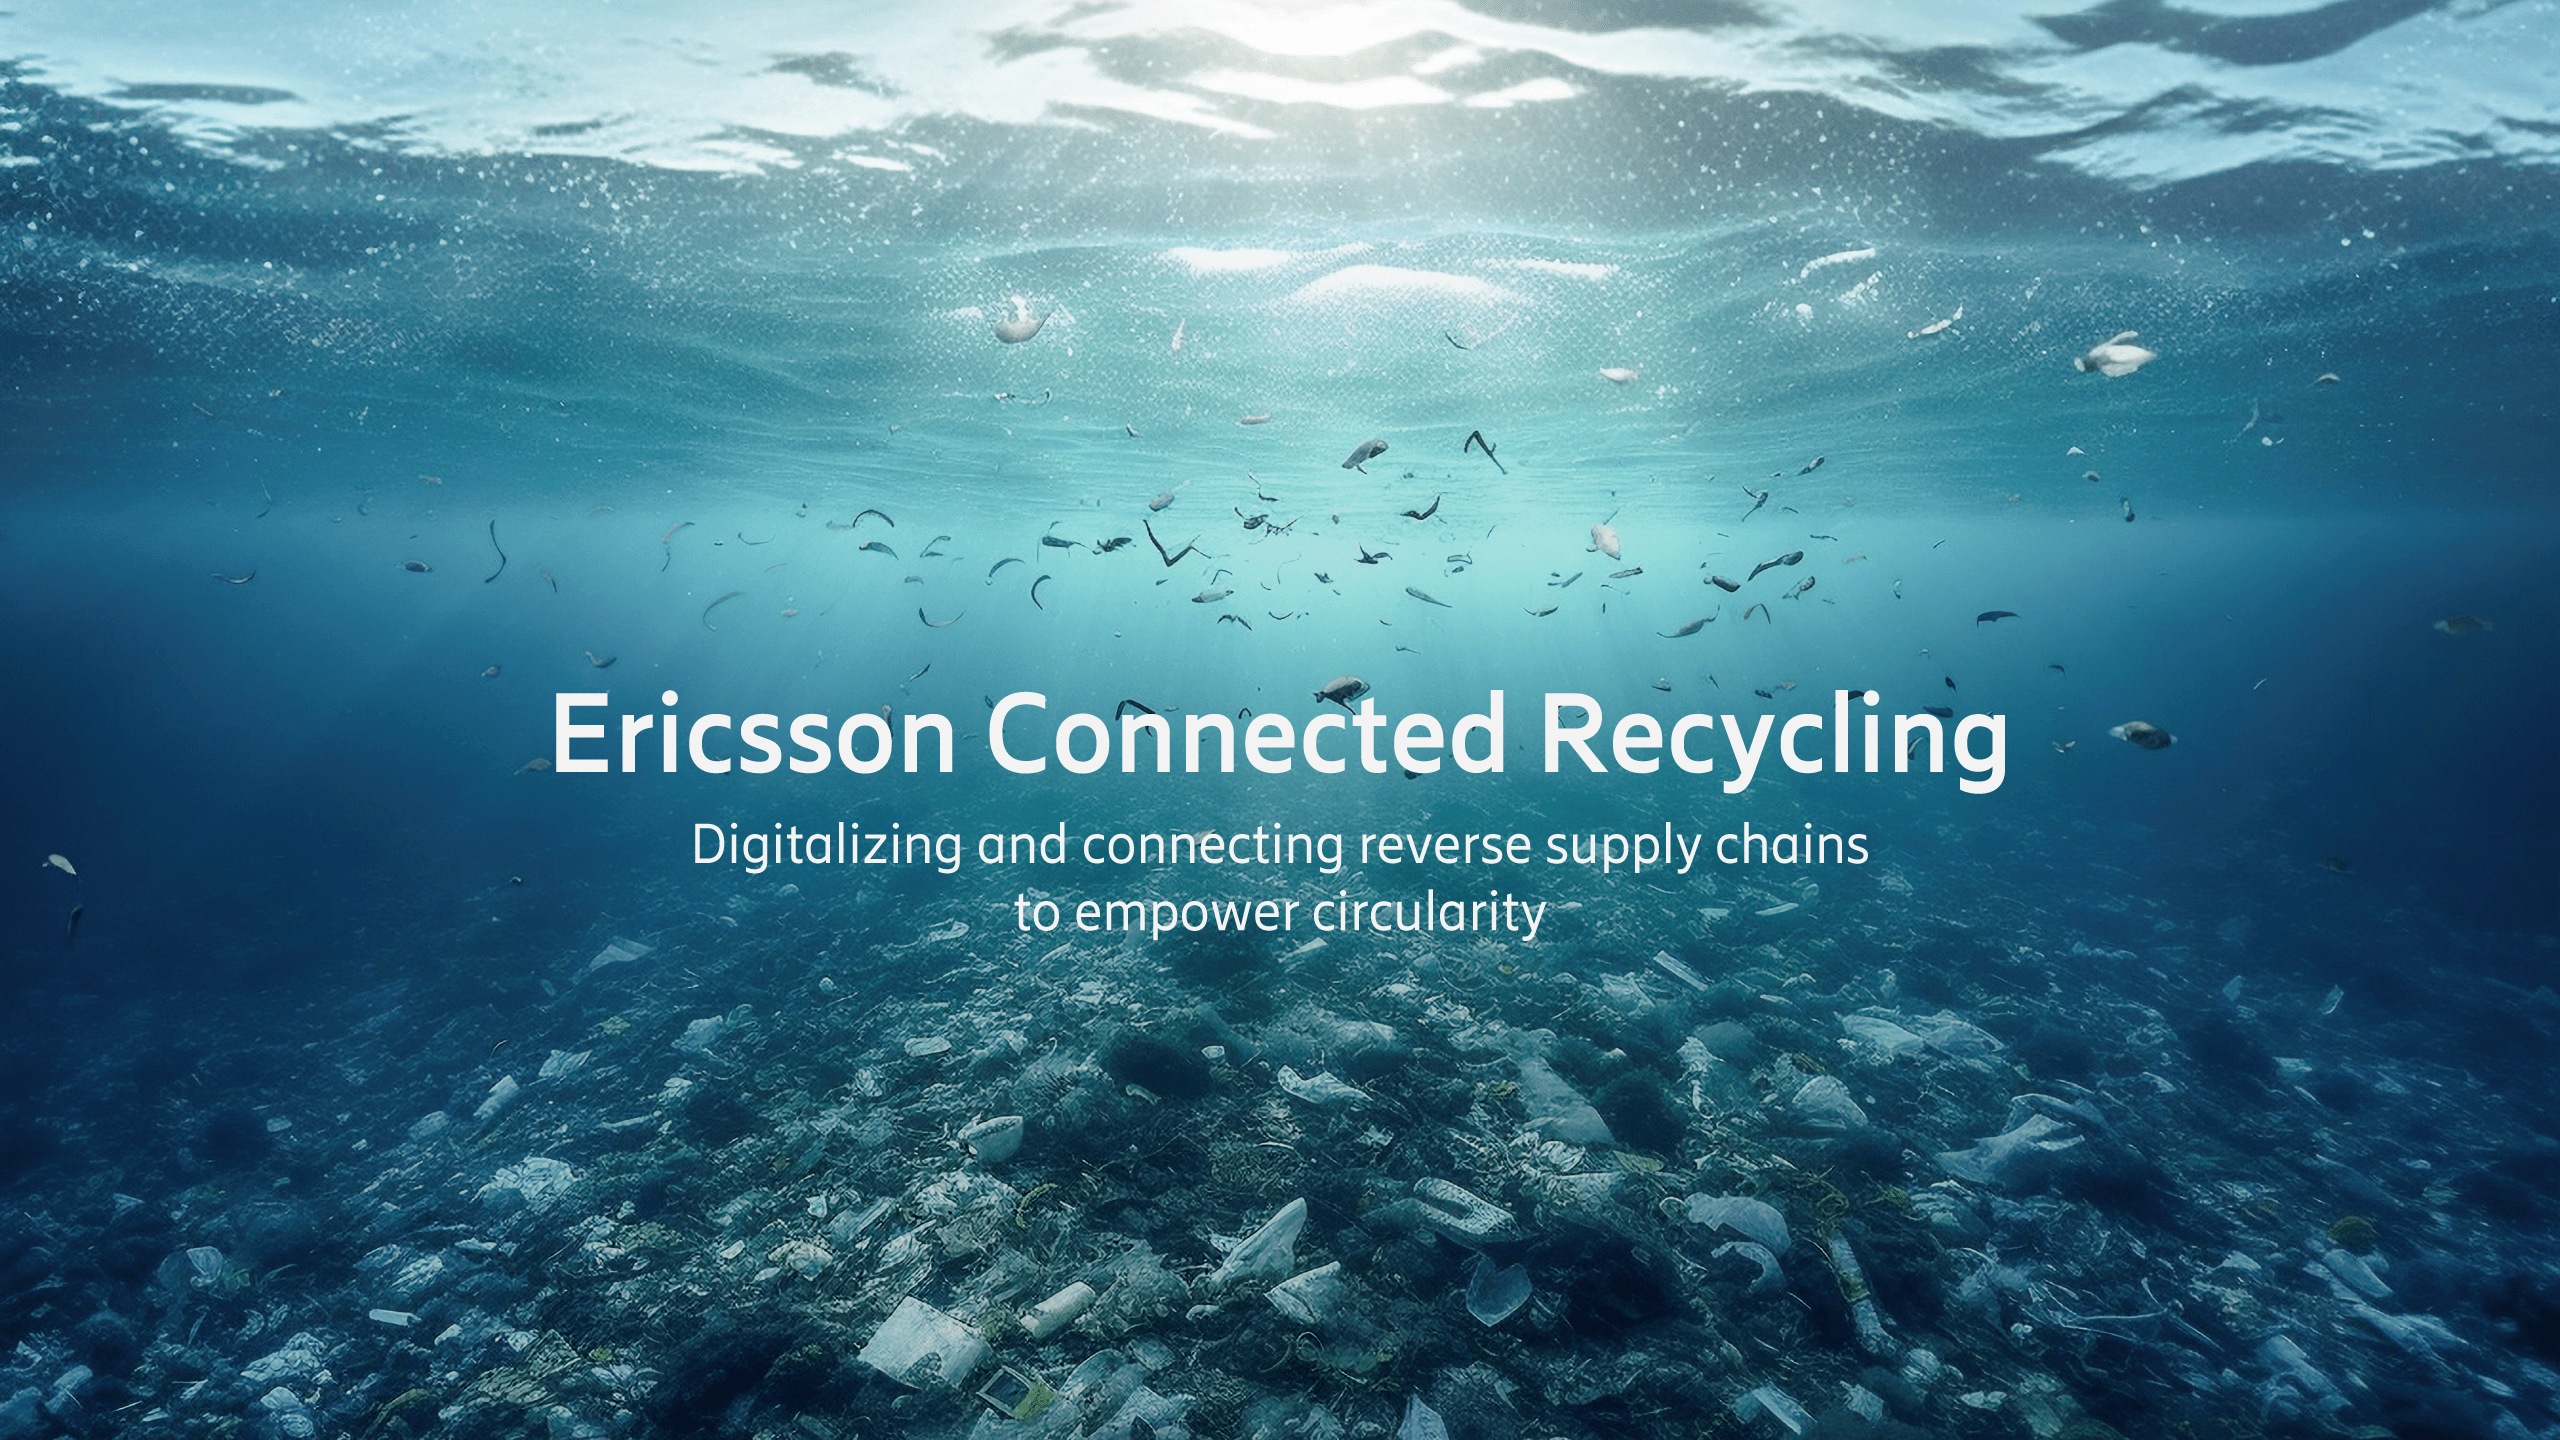 Ericsson Connected Recycling